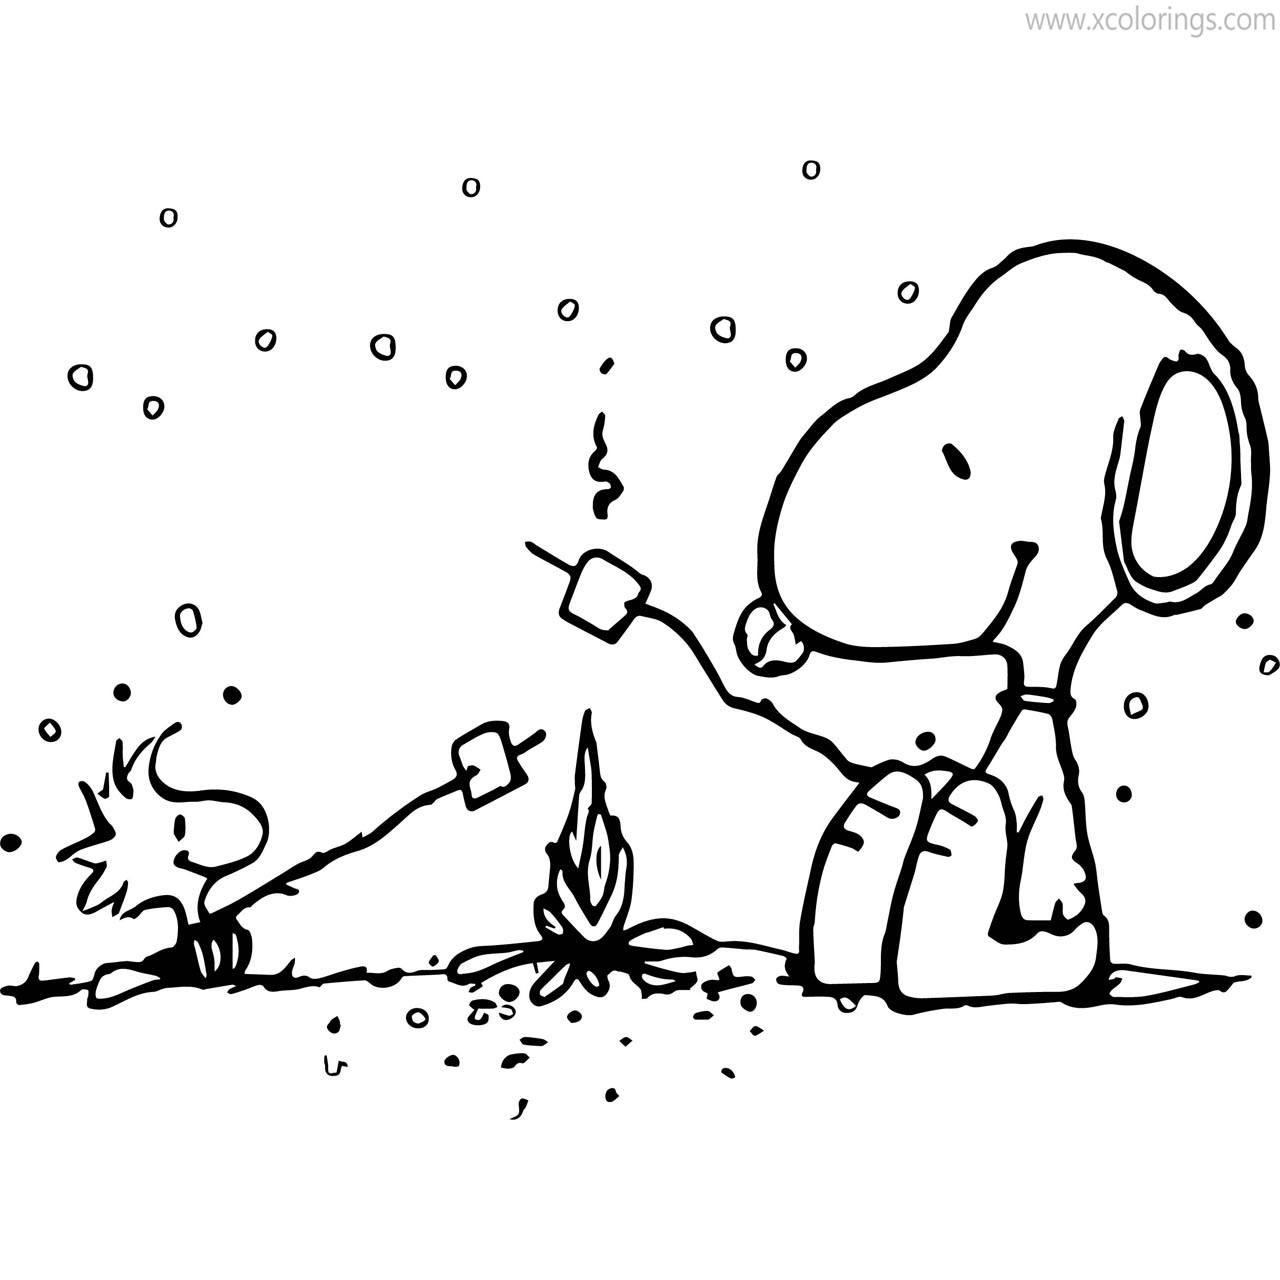 Free Charlie Brown Christmas Coloring Pages Snoopy and Woodstock with Marshmallow printable